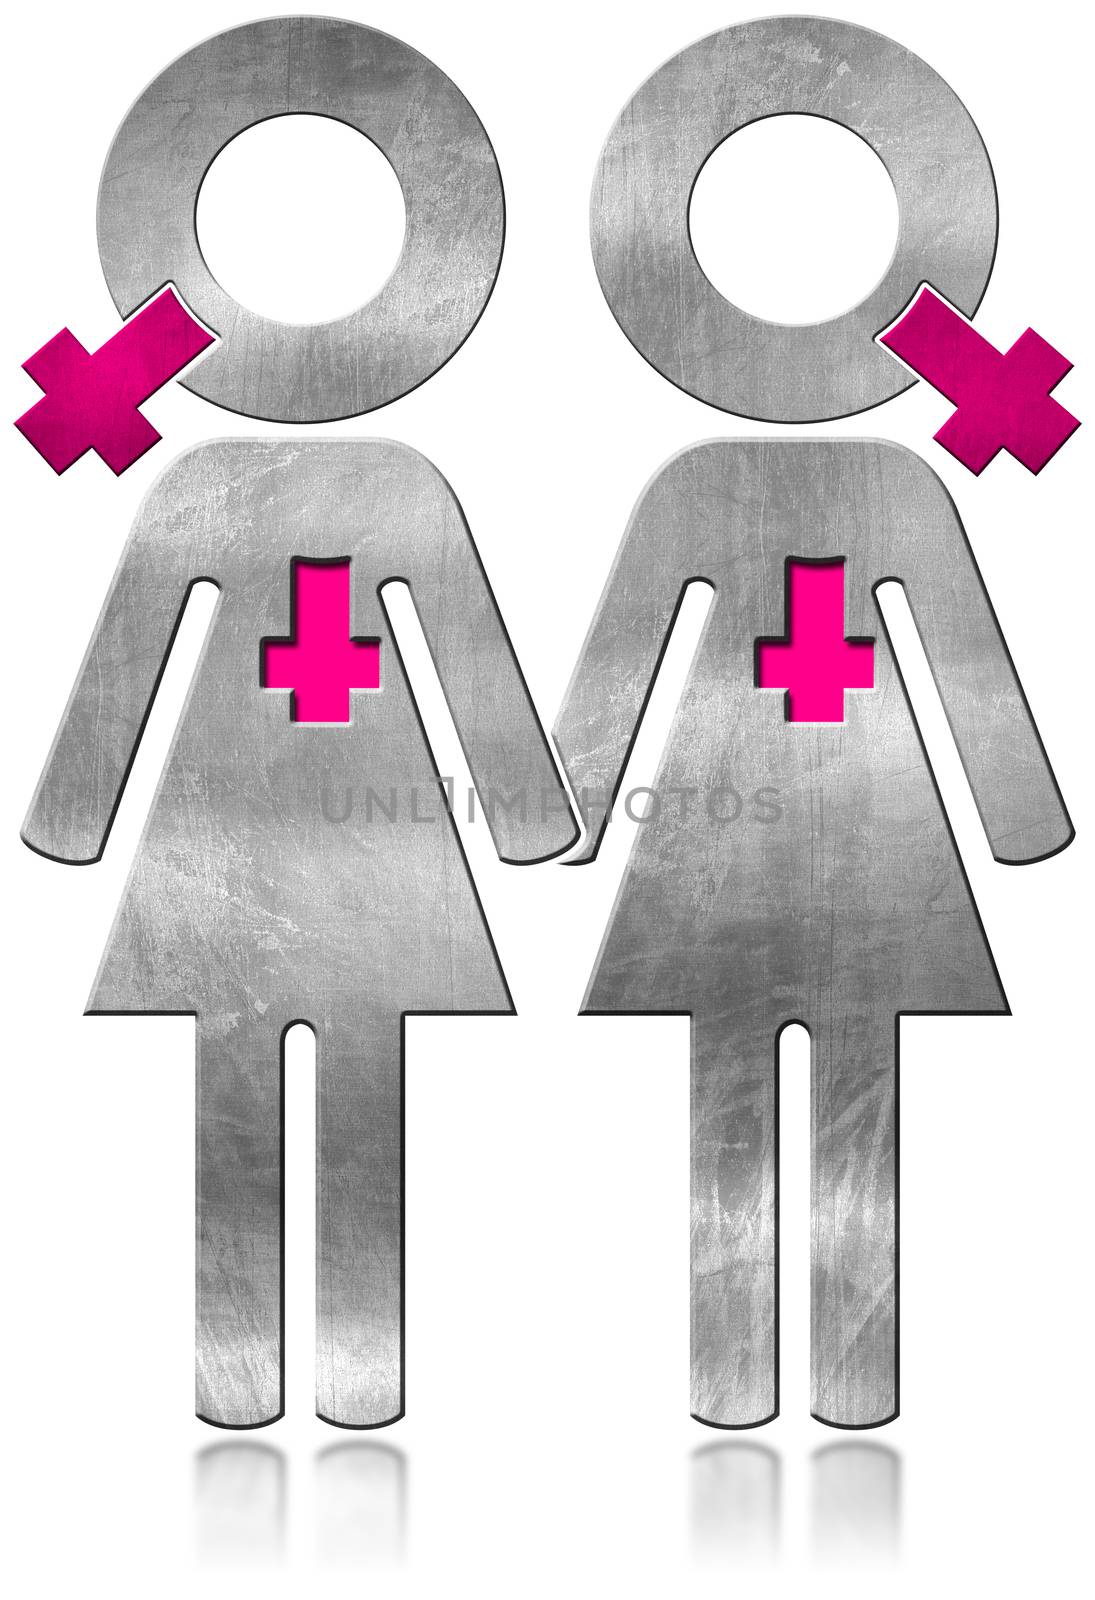 Lesbians Relationship - Metal Symbol by catalby